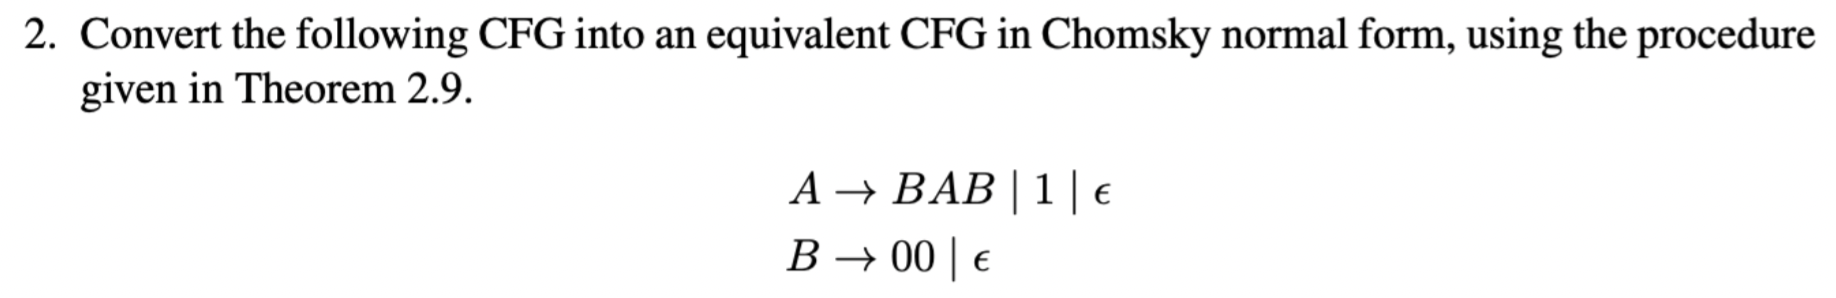 2. Convert the following CFG into an equivalent CFG in Chomsky normal form, using the procedure given in